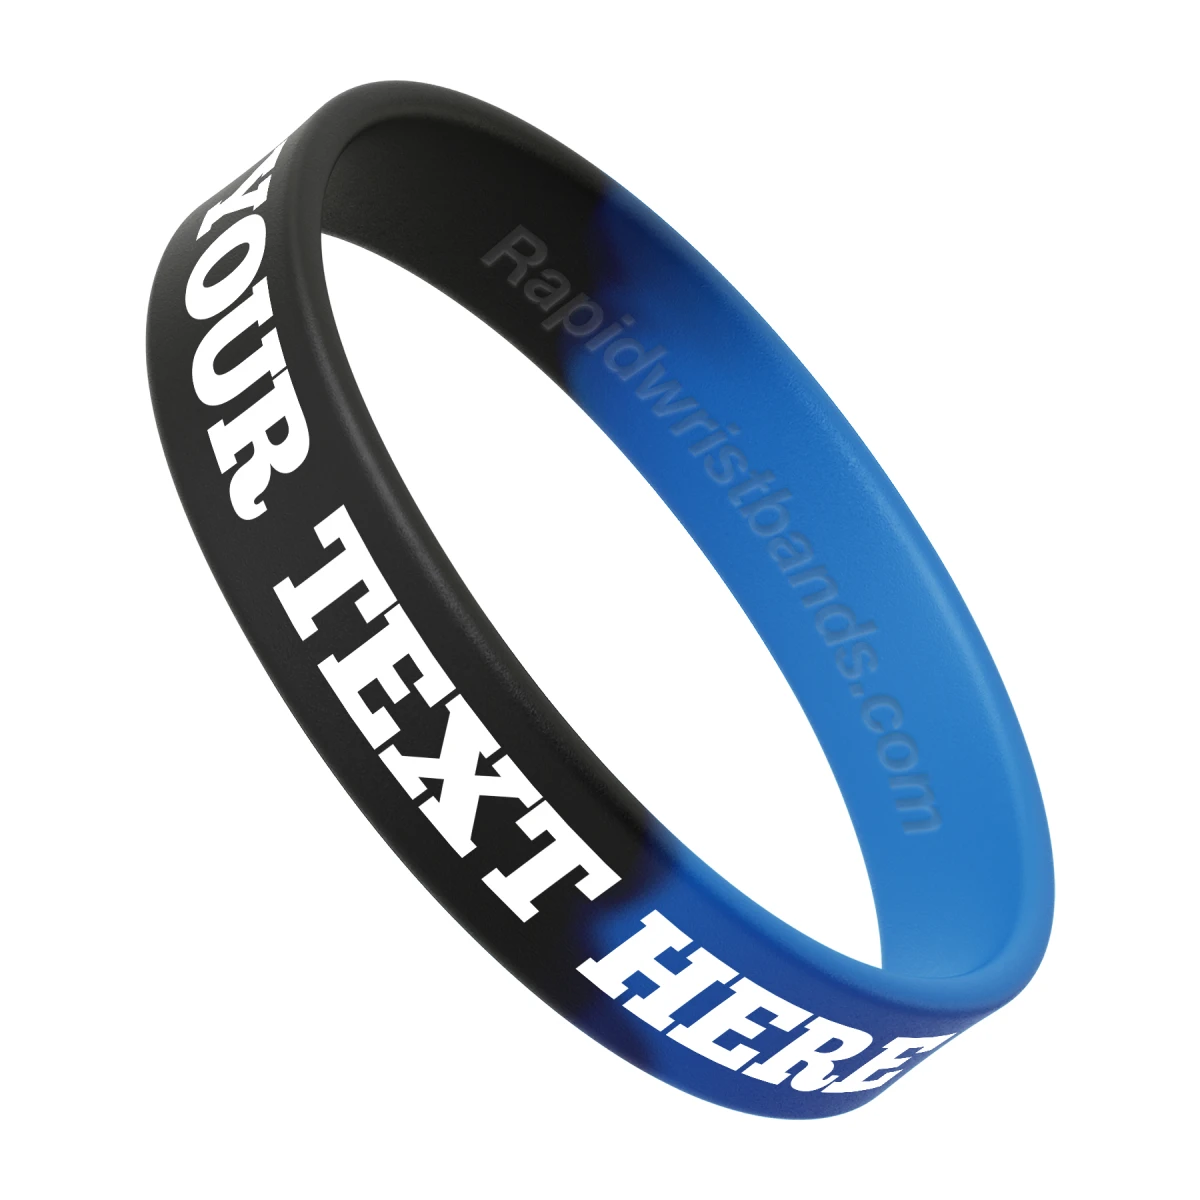 Segmented Black/Blue Wristband With Your Text Here Printed In White